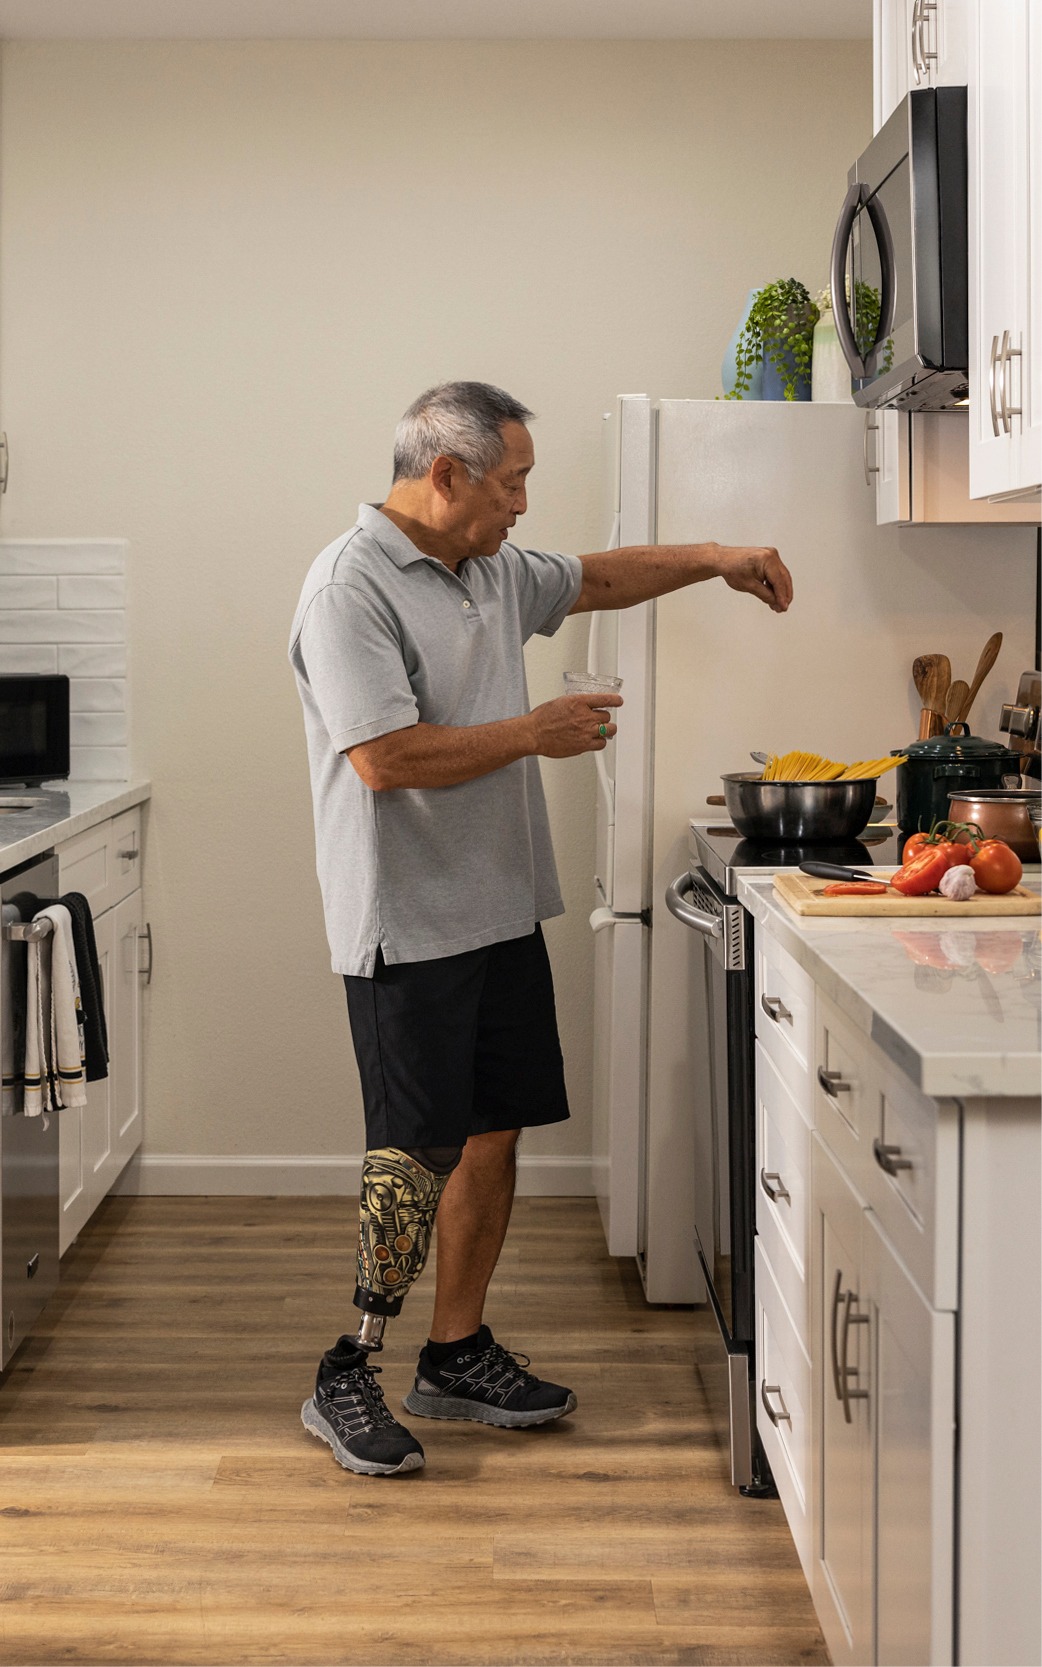 Man with prosthetic leg cooking